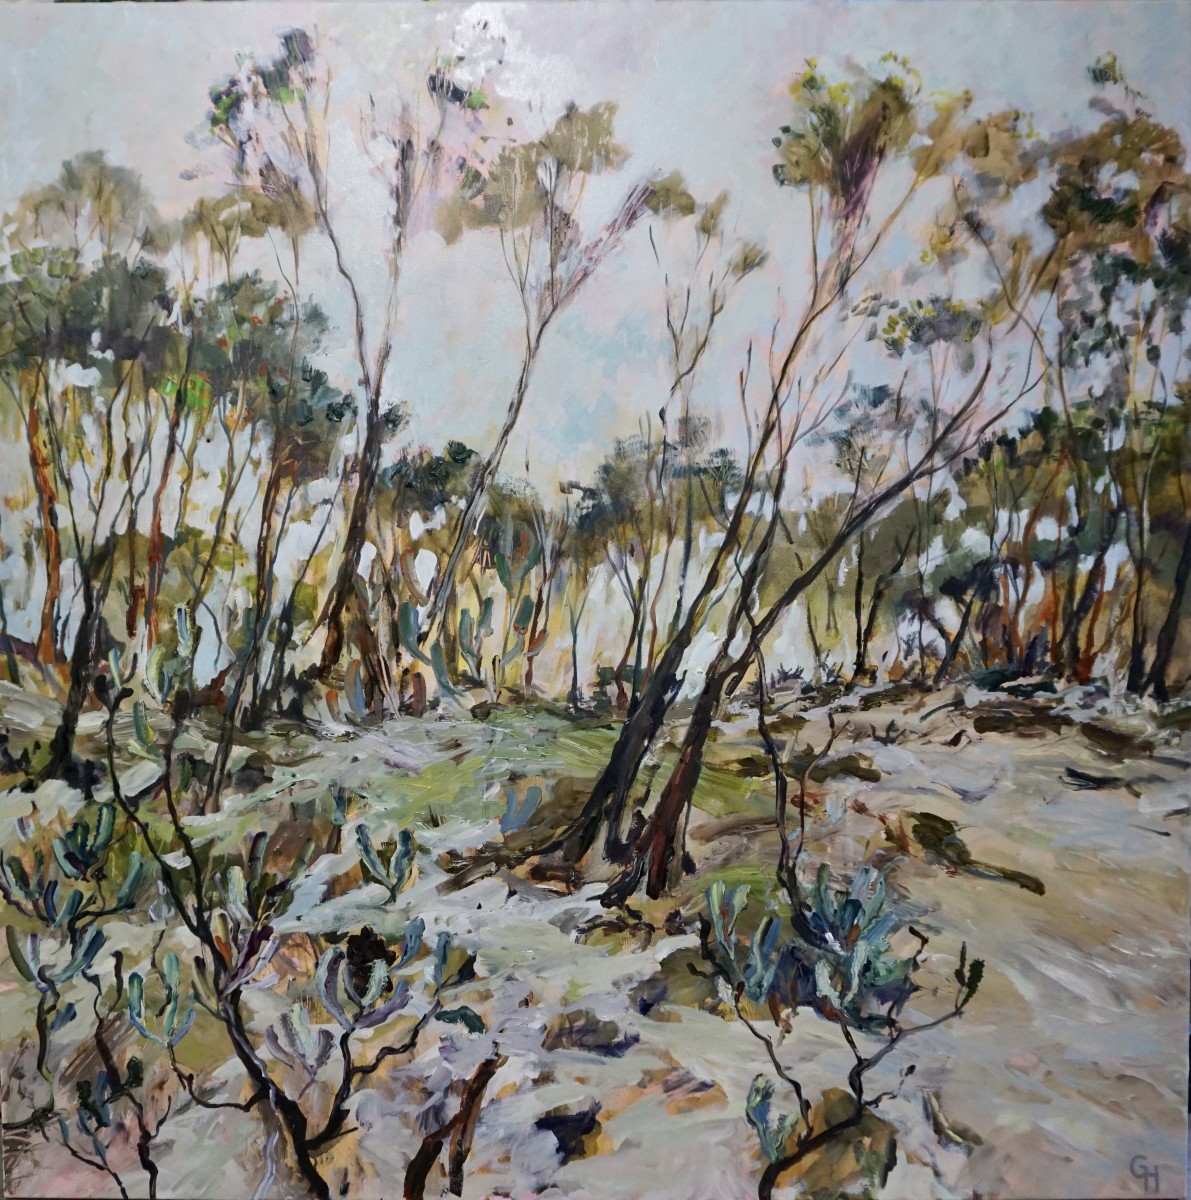 Bushland with Banksias by Gillian Hughes 